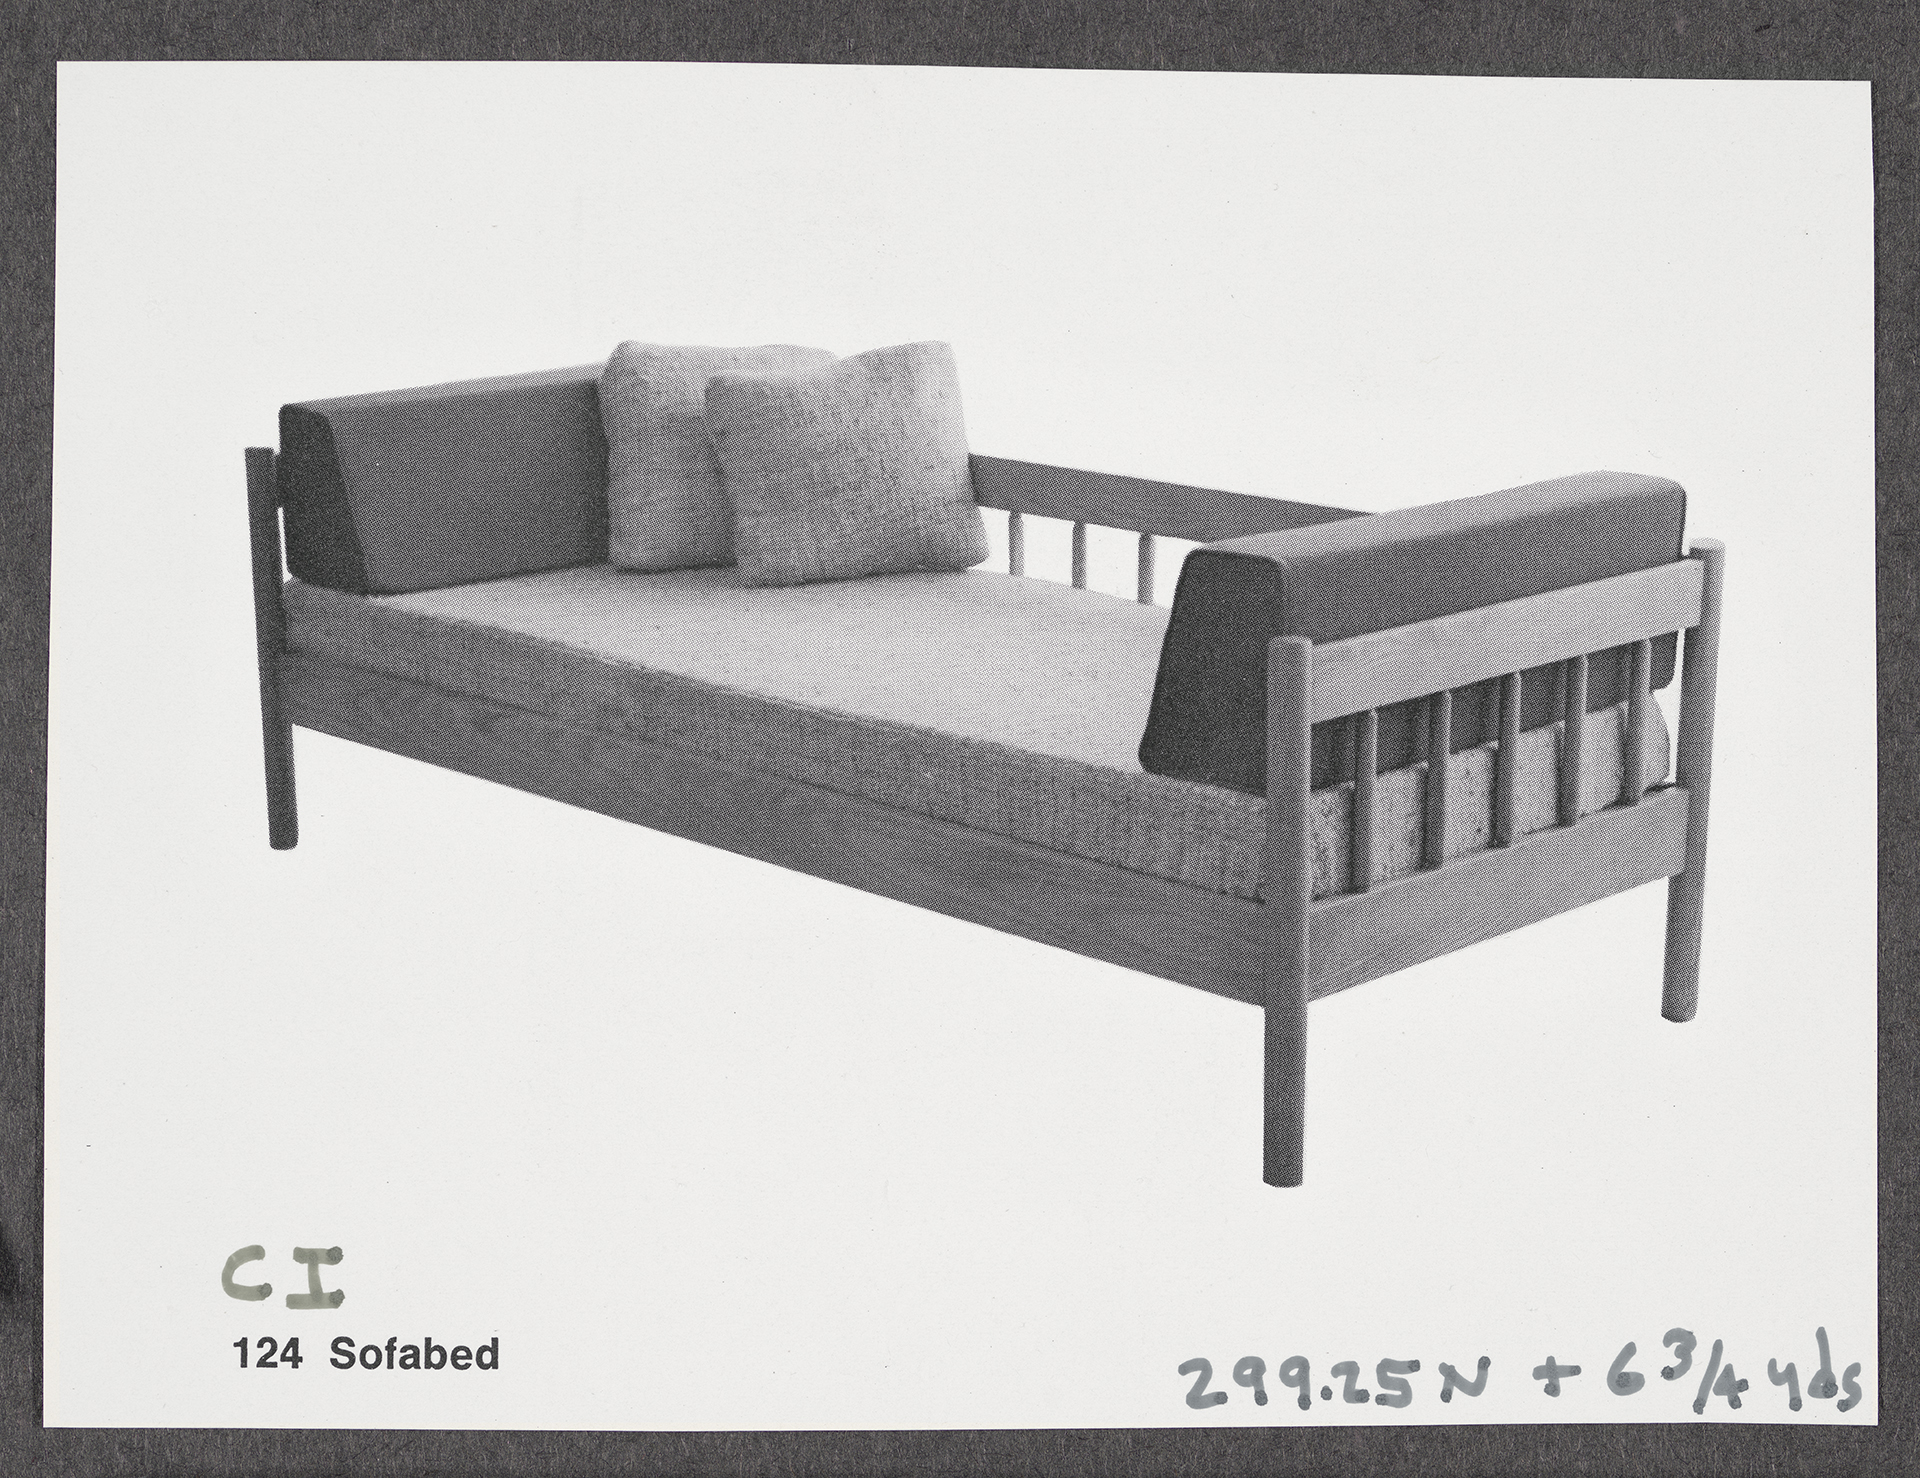 CI Designs, 124 Sofabed, circa 1975, Institutional Archives, Yale Center for British Art 